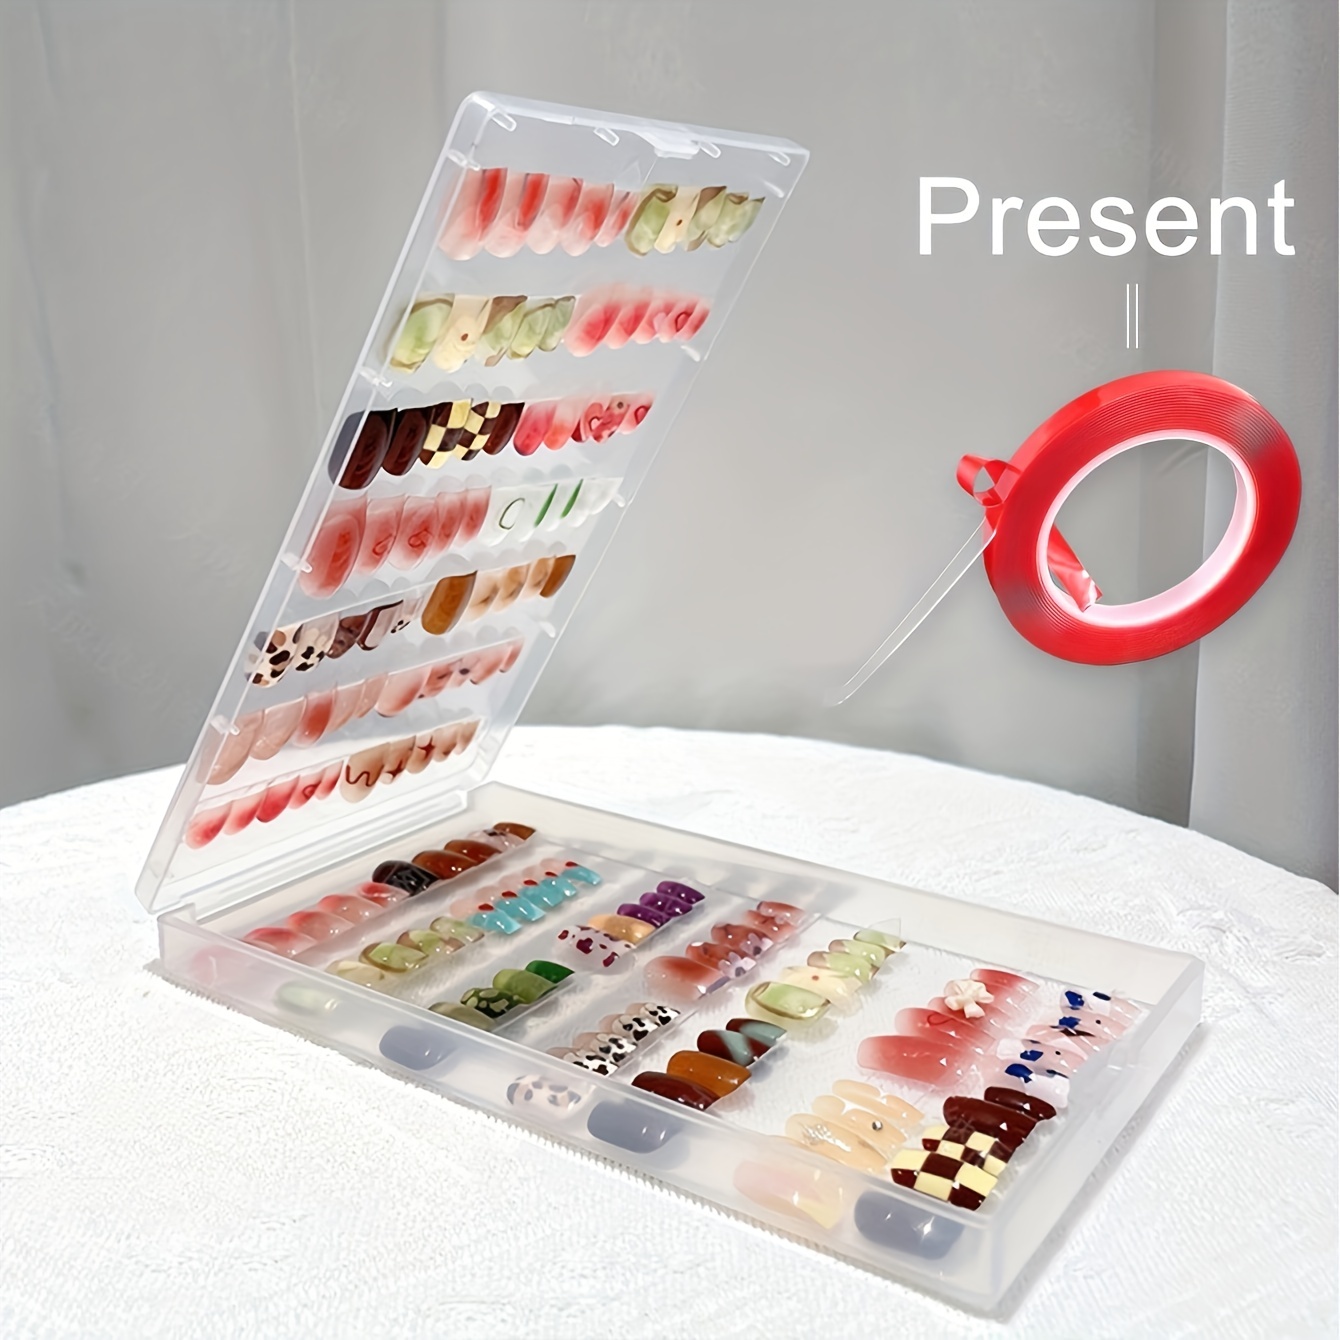 Plusbeauty Artificial Nail For Nail Art Lock Available 500 pcs in 1 Box  Price in India - Buy Plusbeauty Artificial Nail For Nail Art Lock Available  500 pcs in 1 Box online at Flipkart.com